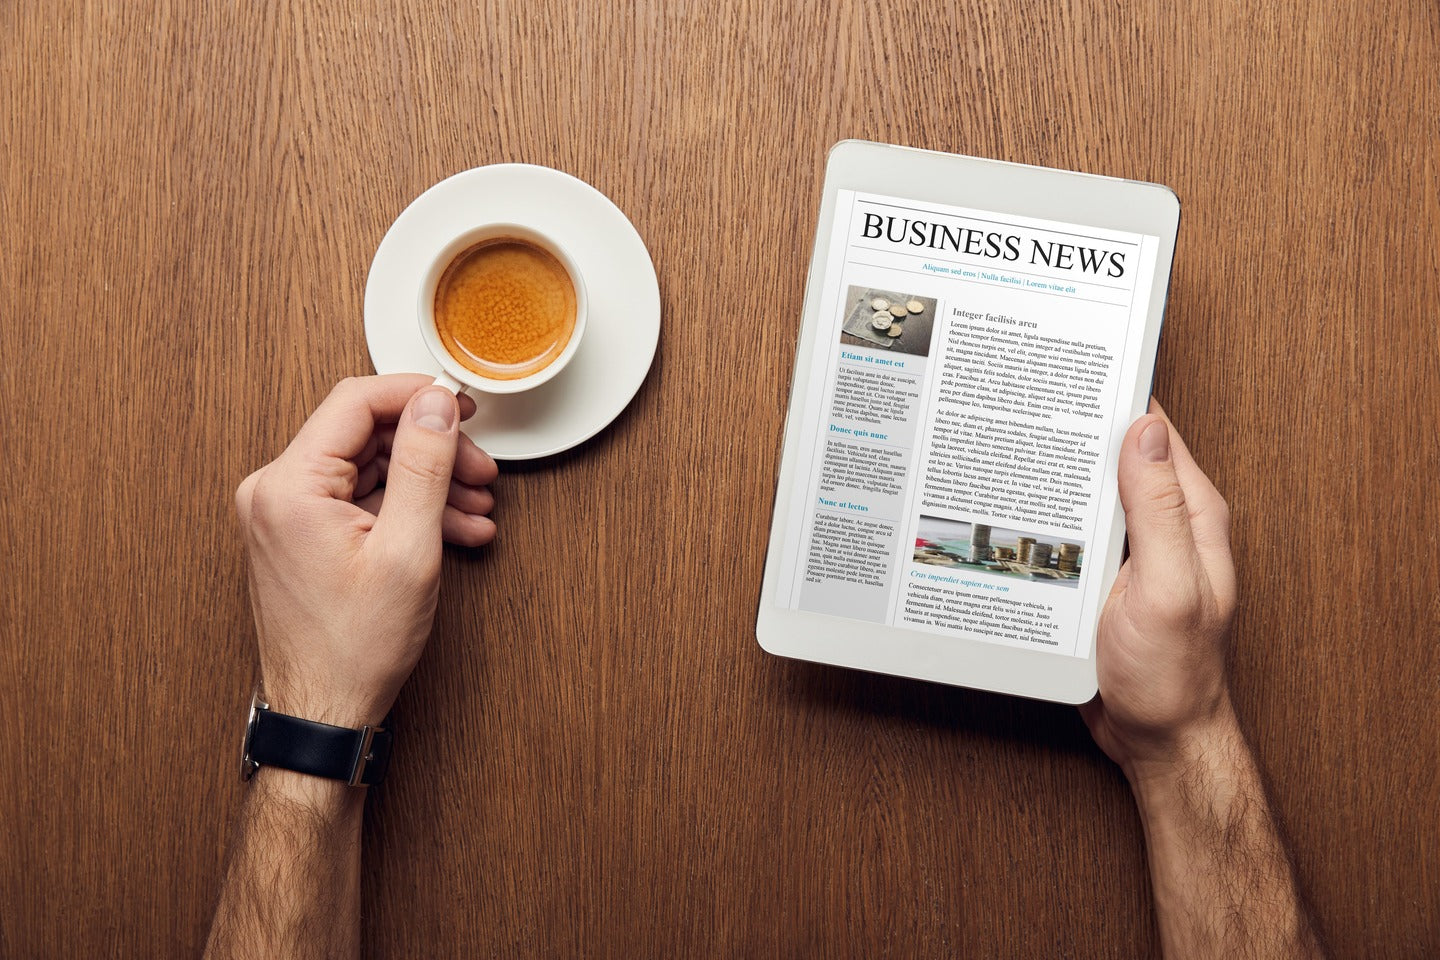 A man is seated at a table, holding a coffee cup in one hand and tablet with Business News headline in the other